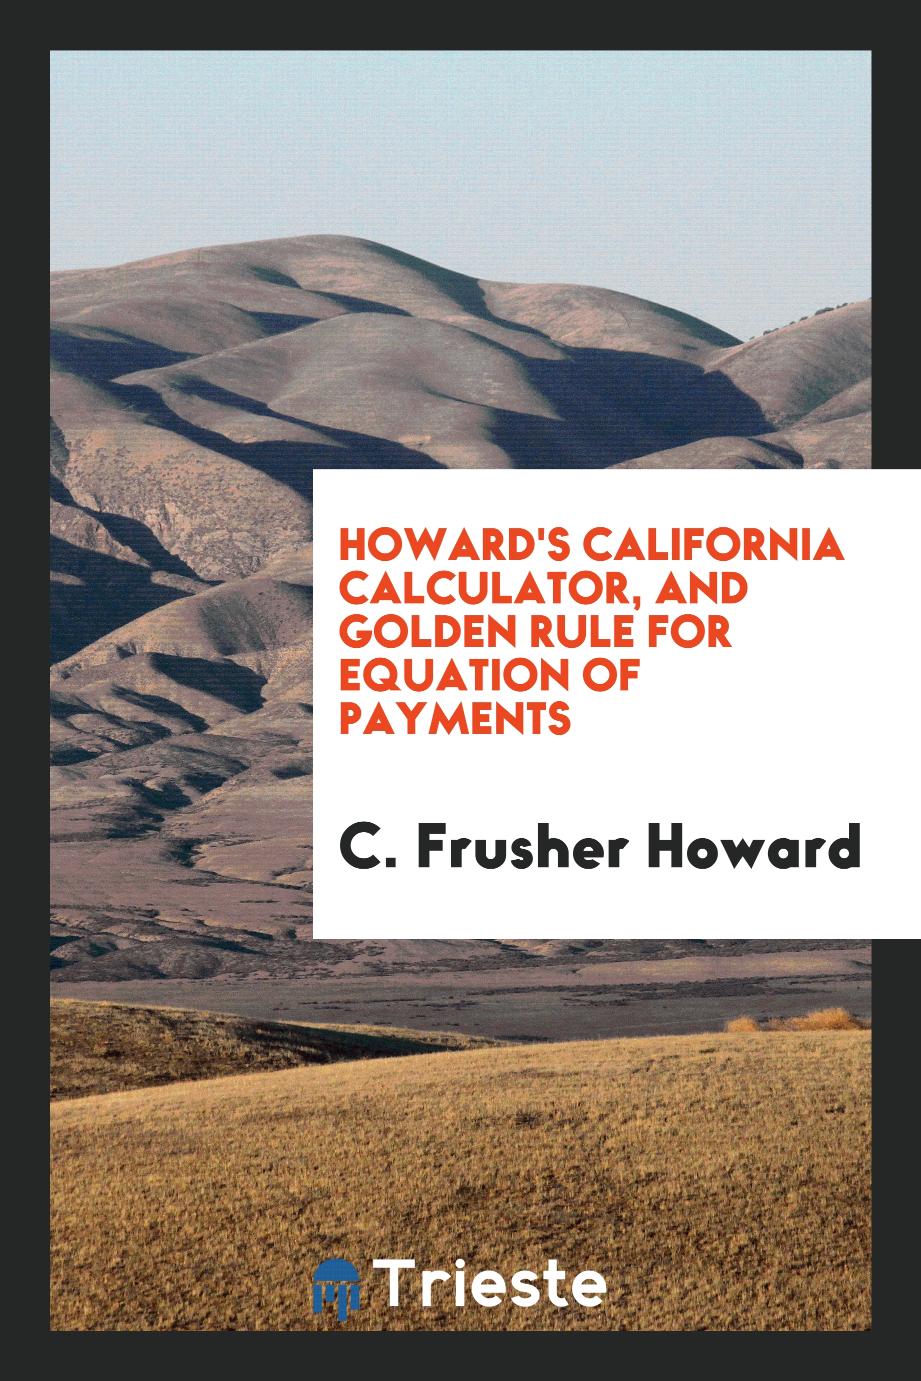 Howard's California Calculator, and Golden Rule for Equation of Payments